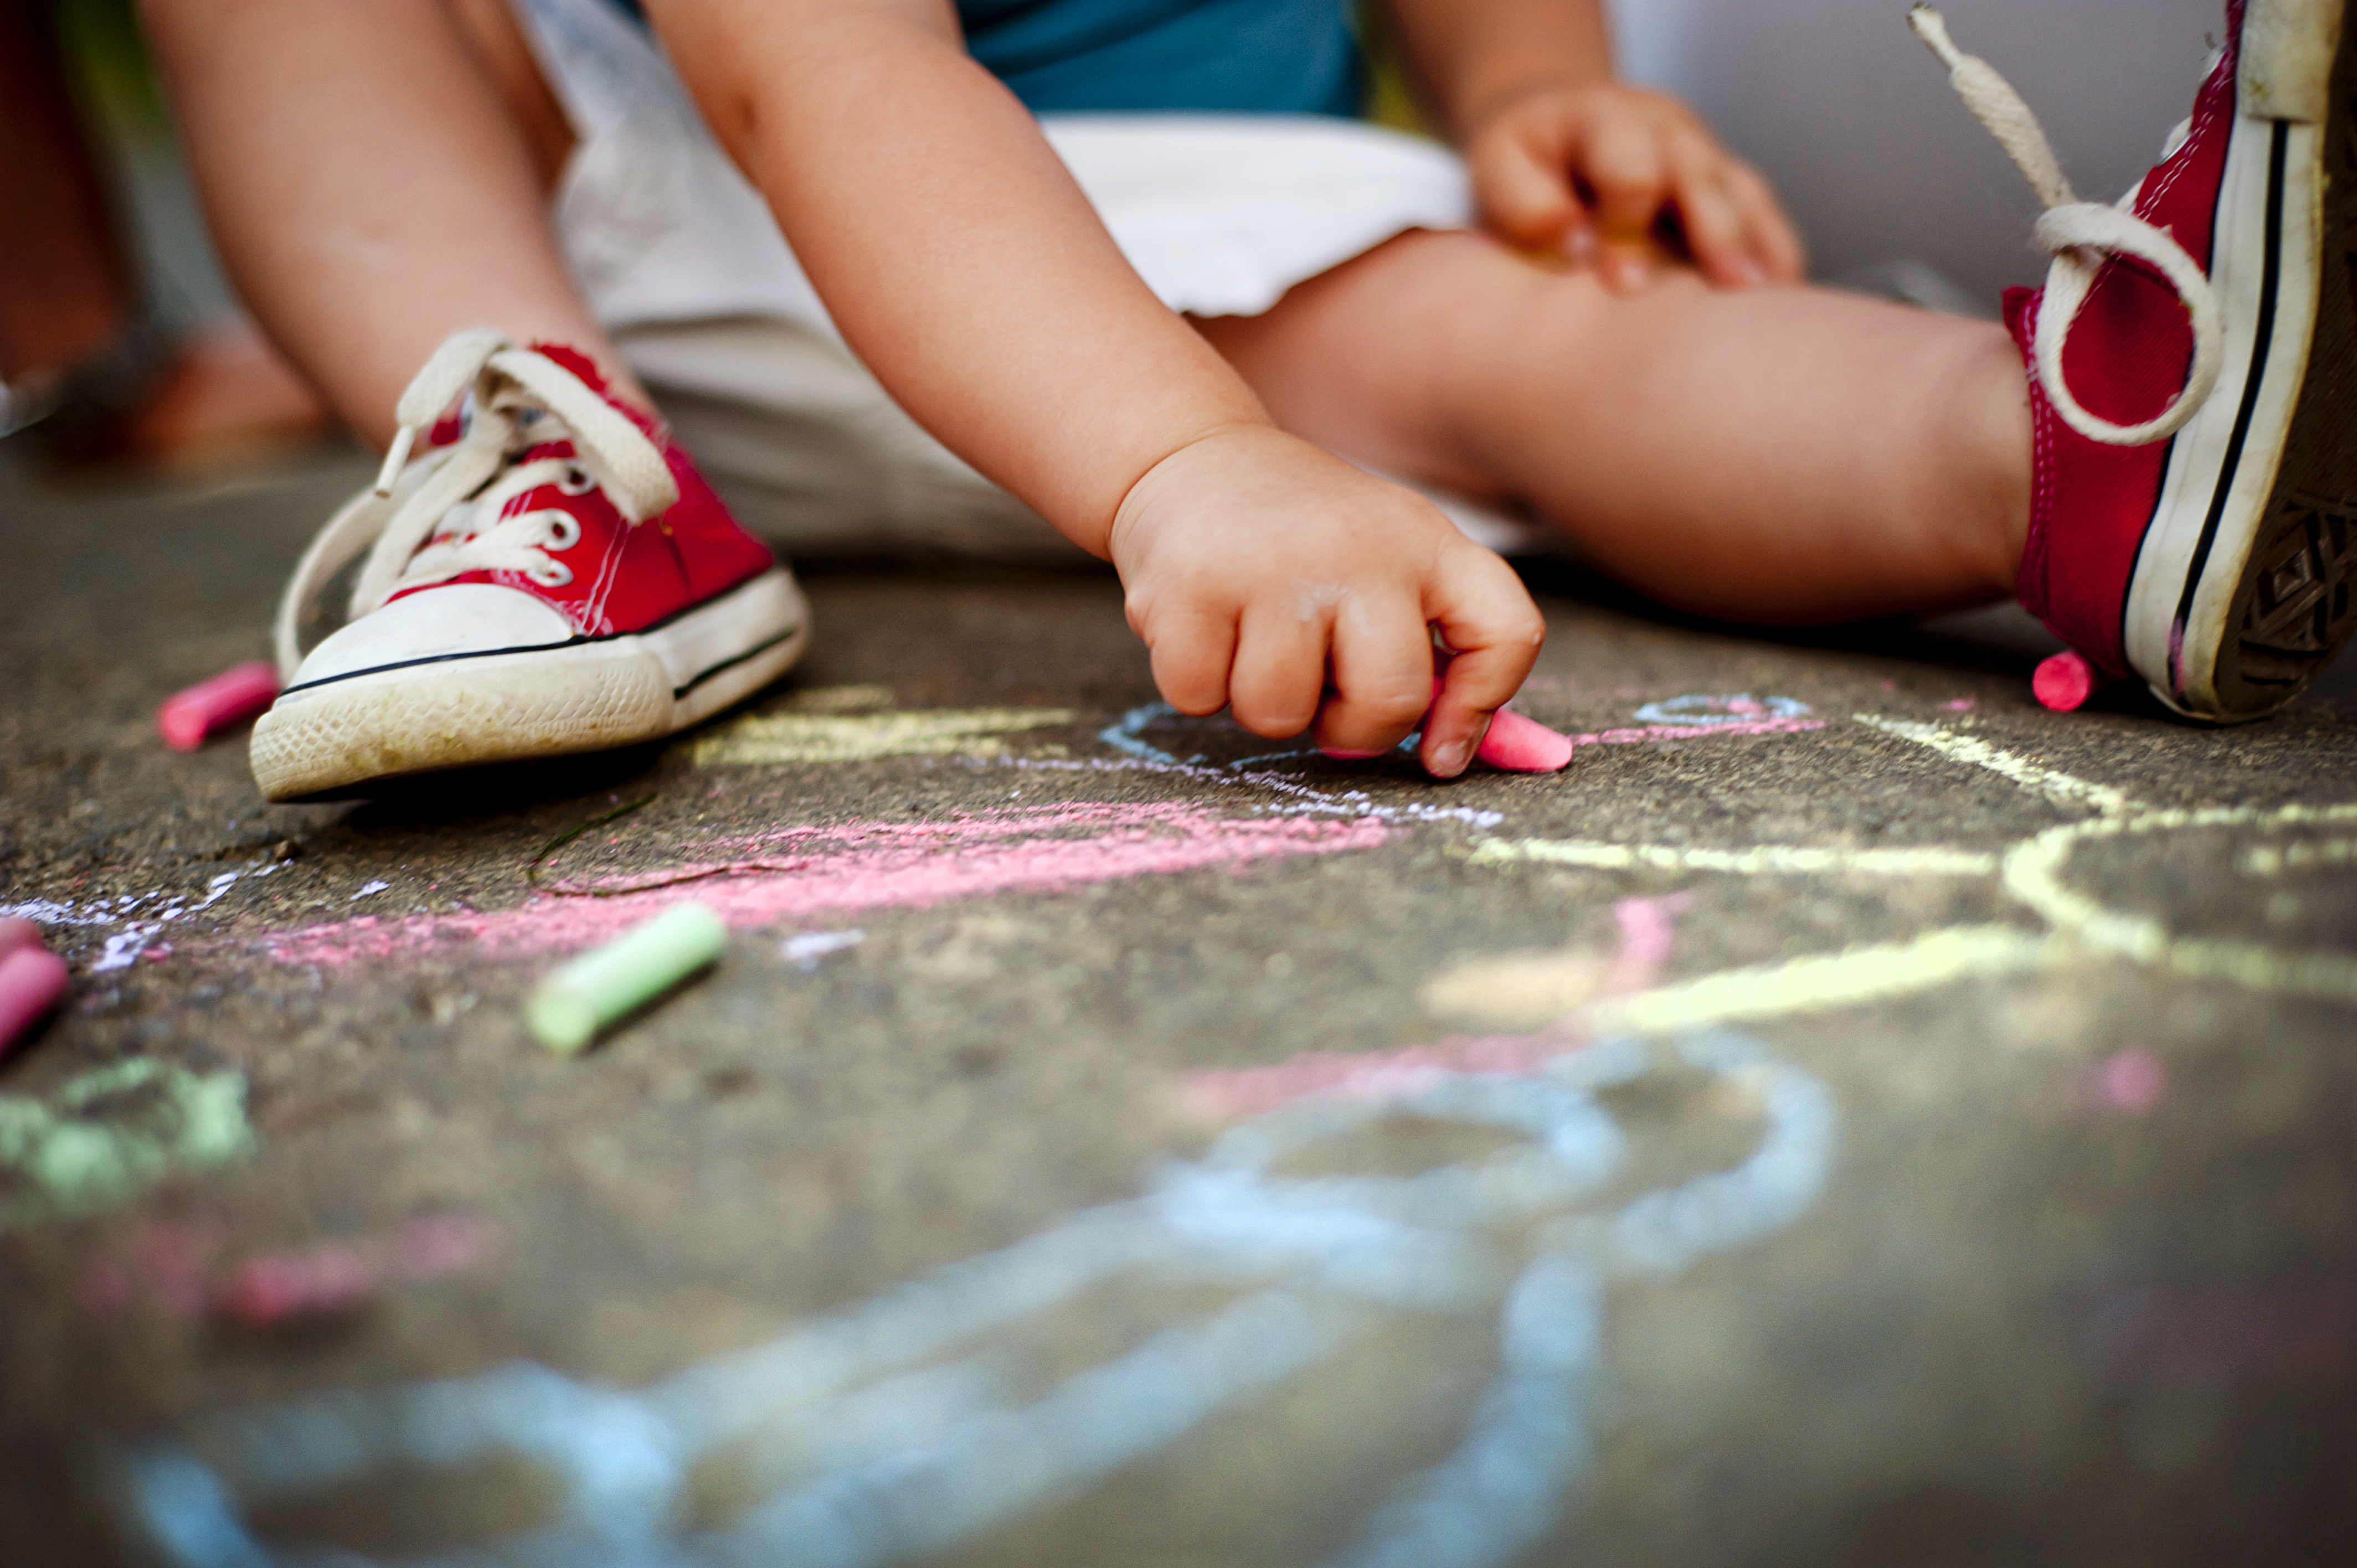 graphicstock-close-up-of-little-boy-in-canvas-shoes-drawing-with-chalks-on-the-sidewalk_SATdiG2bZ.jpg